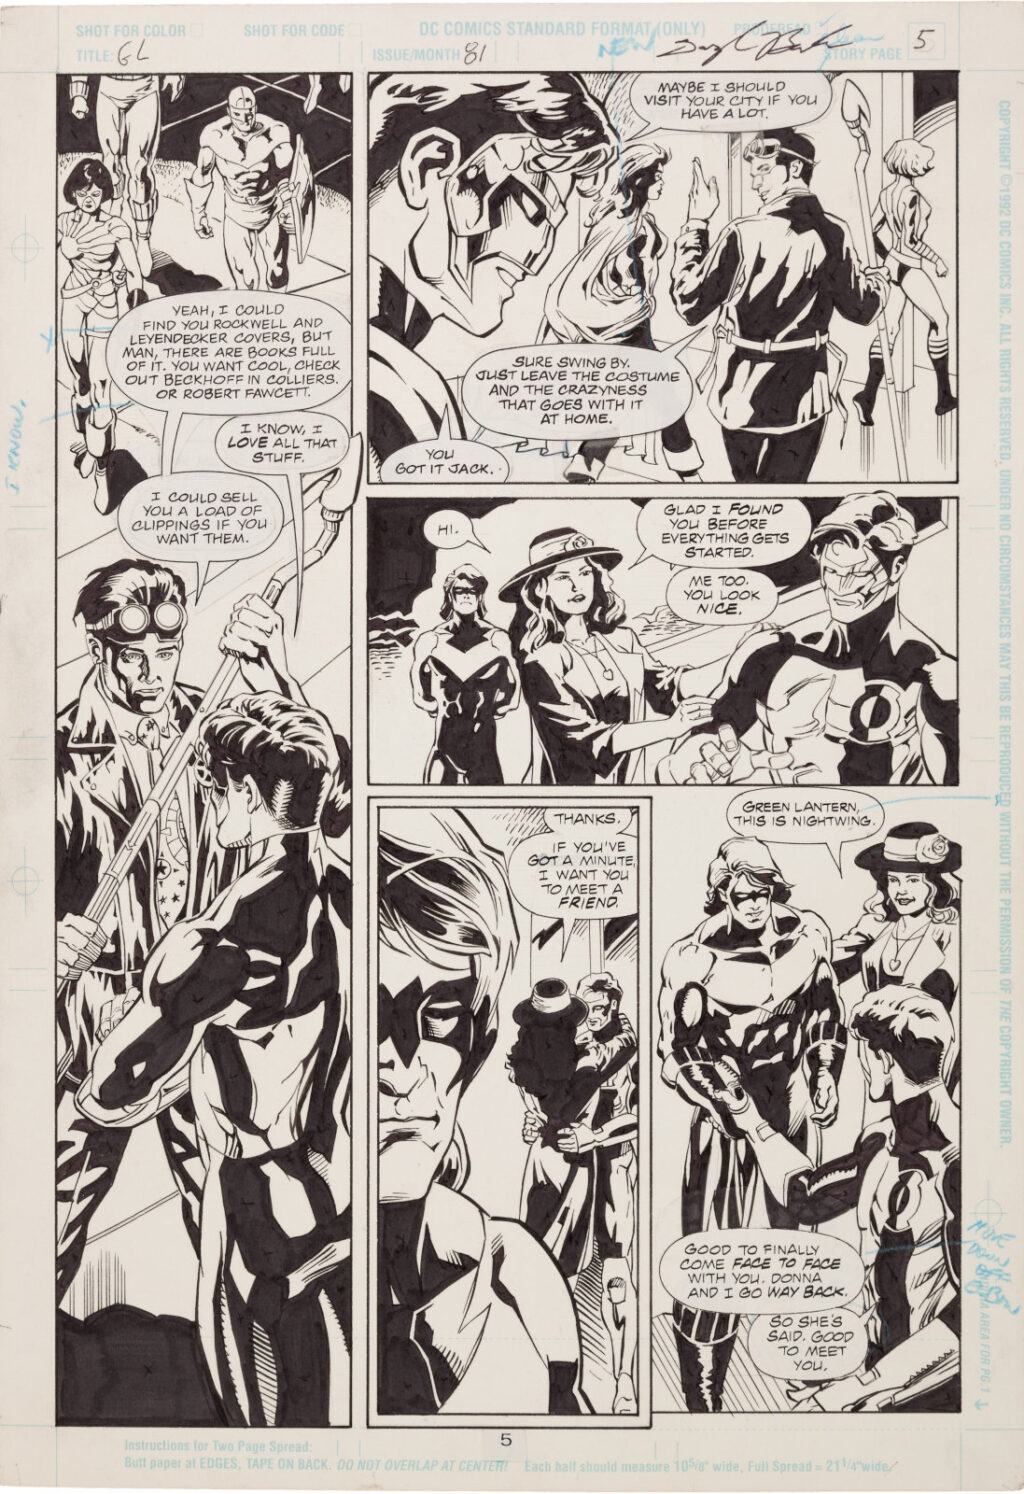 Green Lantern issue 81 page 5 by Darryl Banks and Romeo Tanghal